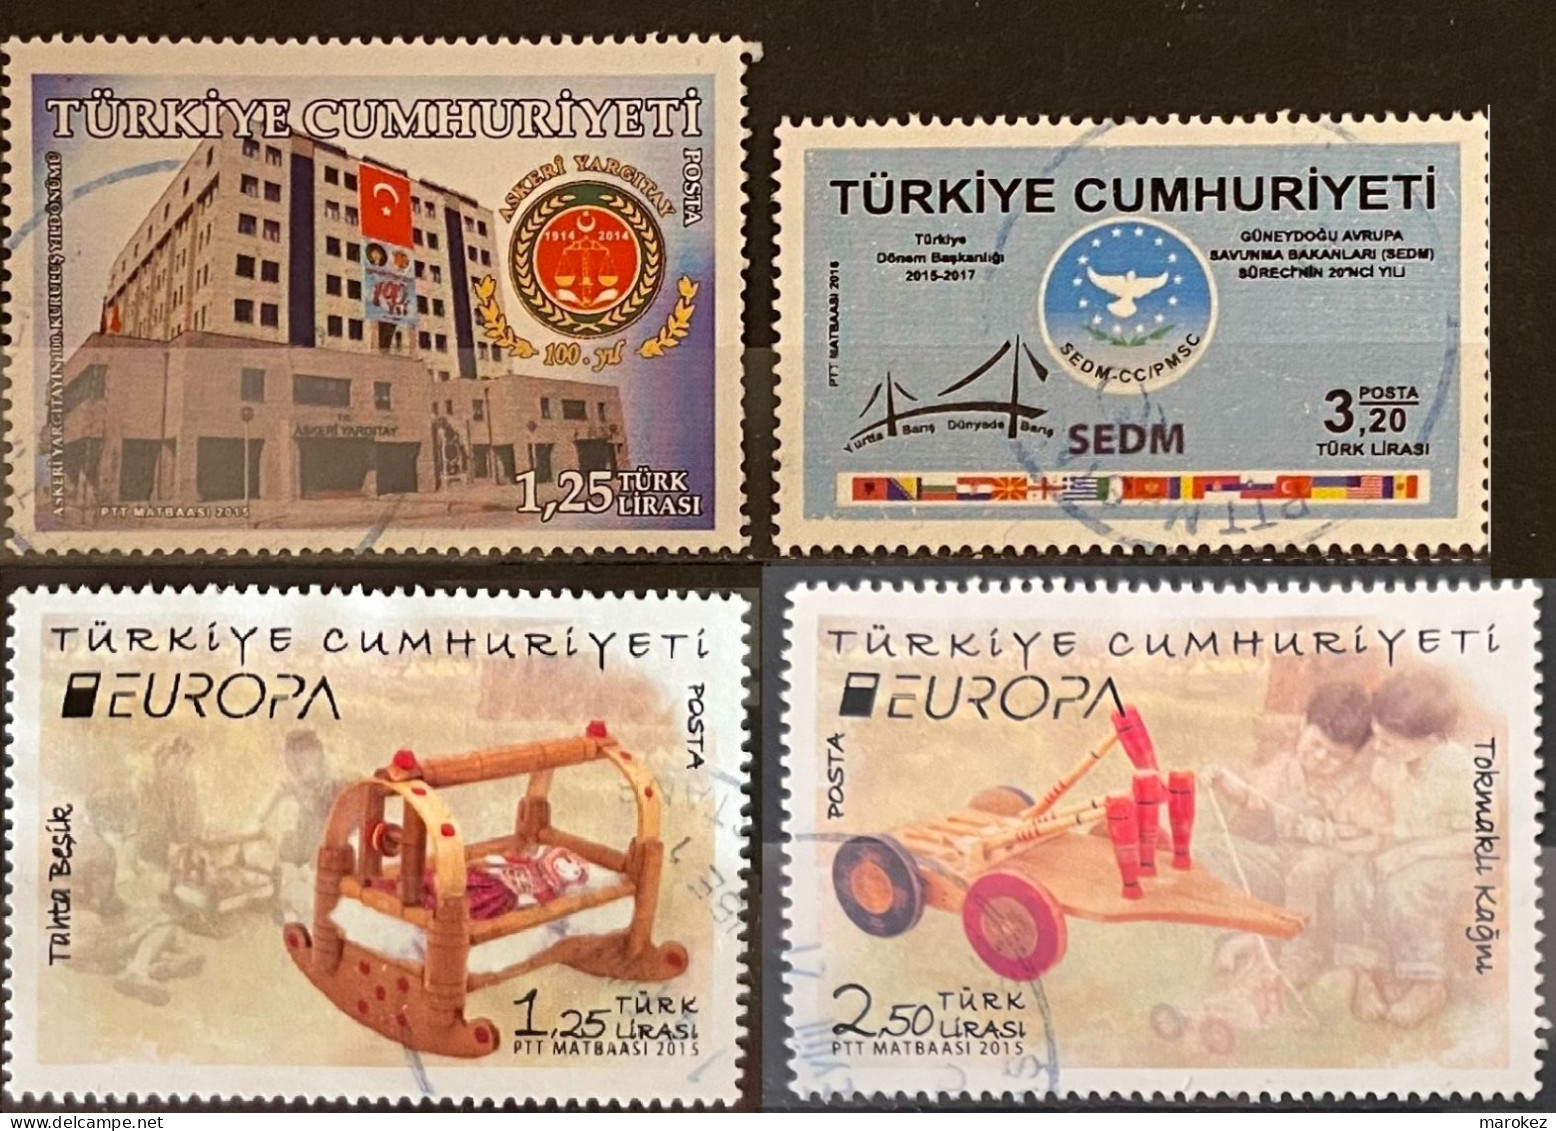 TURKEY 2015-2016 Institutions, Europa & Associations 4 Postally Used Stamps MICHEL # 4166,4176,4177,4307 - Usados